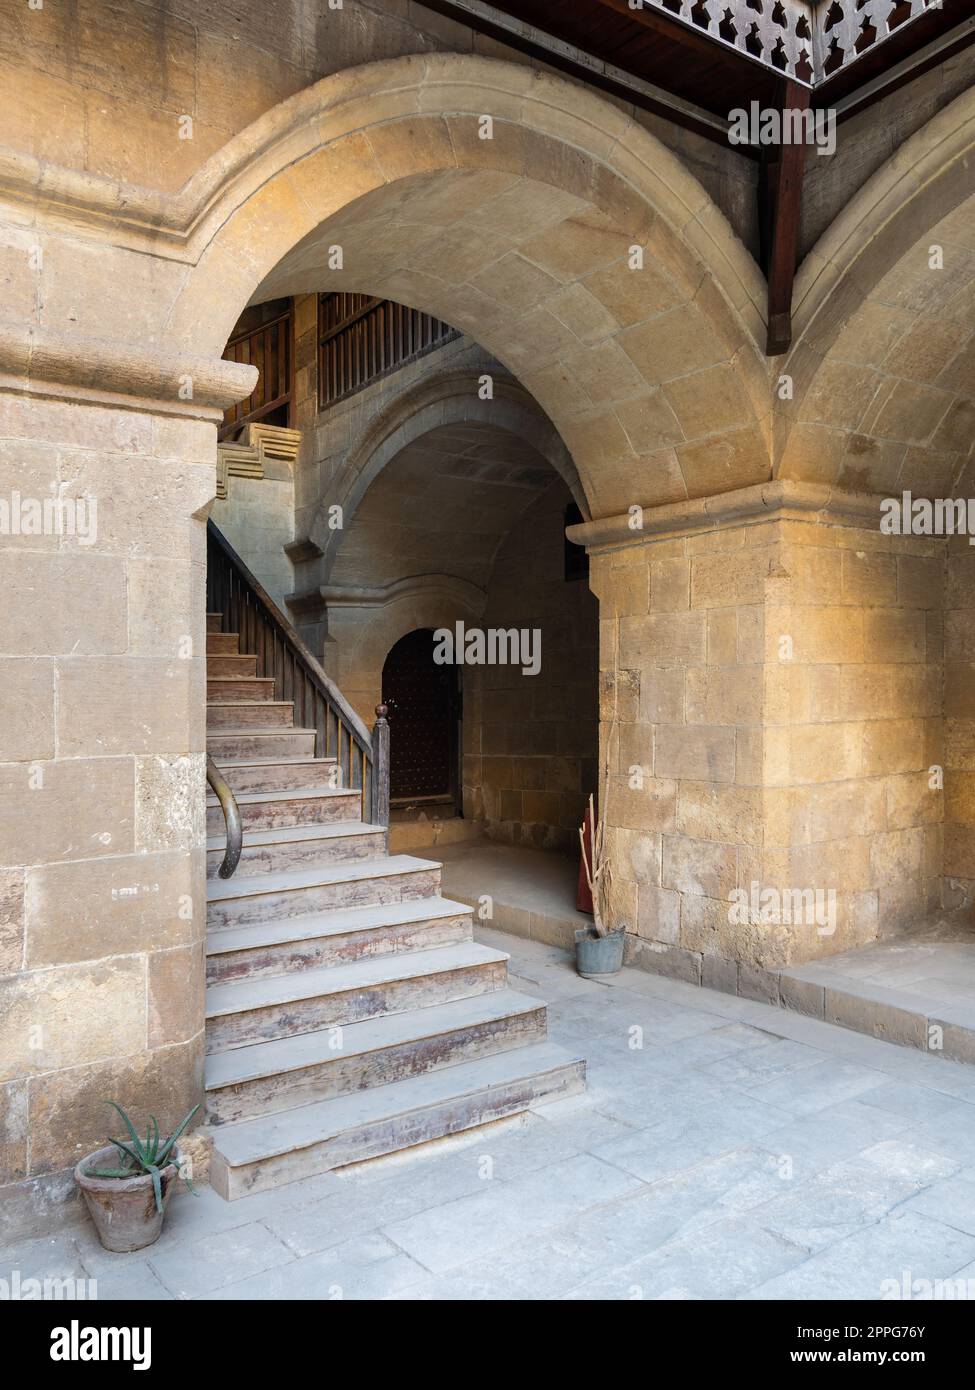 Staircase with wooden balustrade leading to an old abandoned historic building, Cairo, Egypt Stock Photo